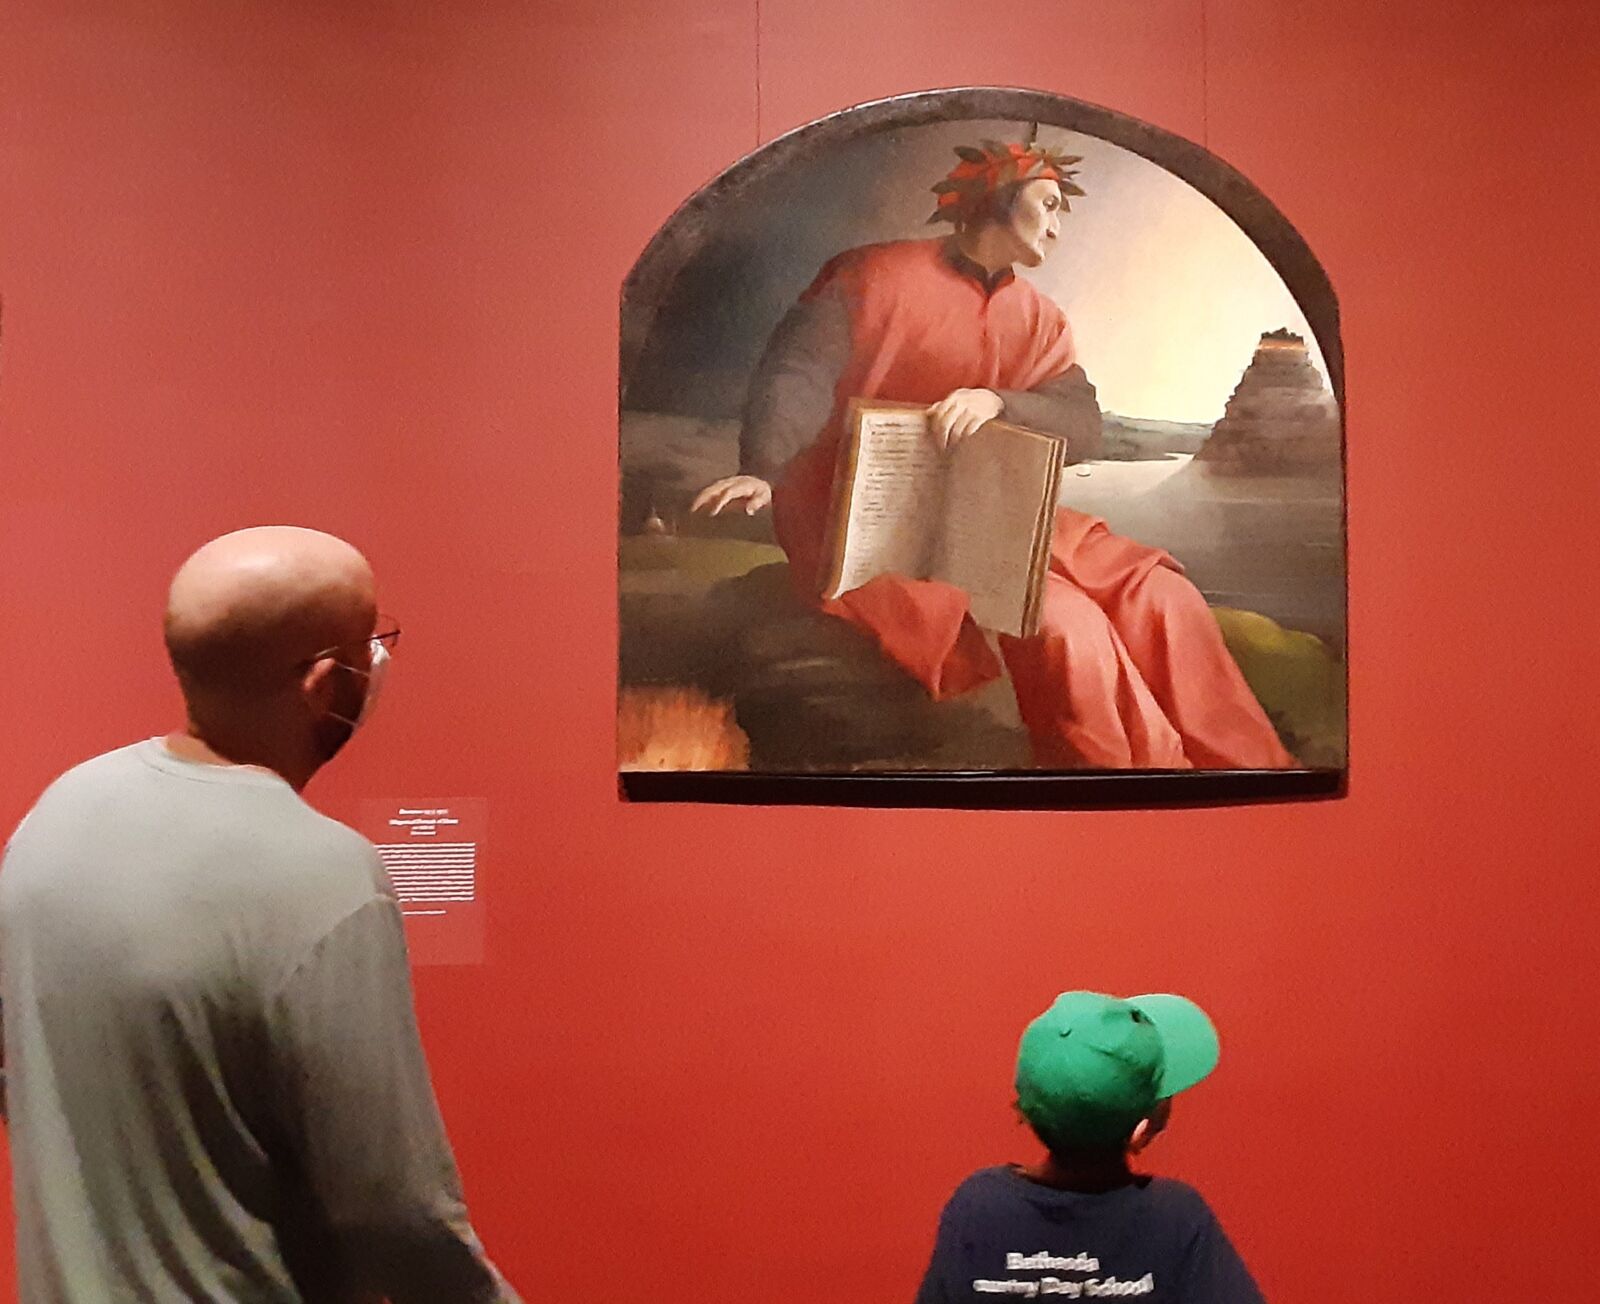 Dante and Virgil: The Painting, Their Relationship, & More